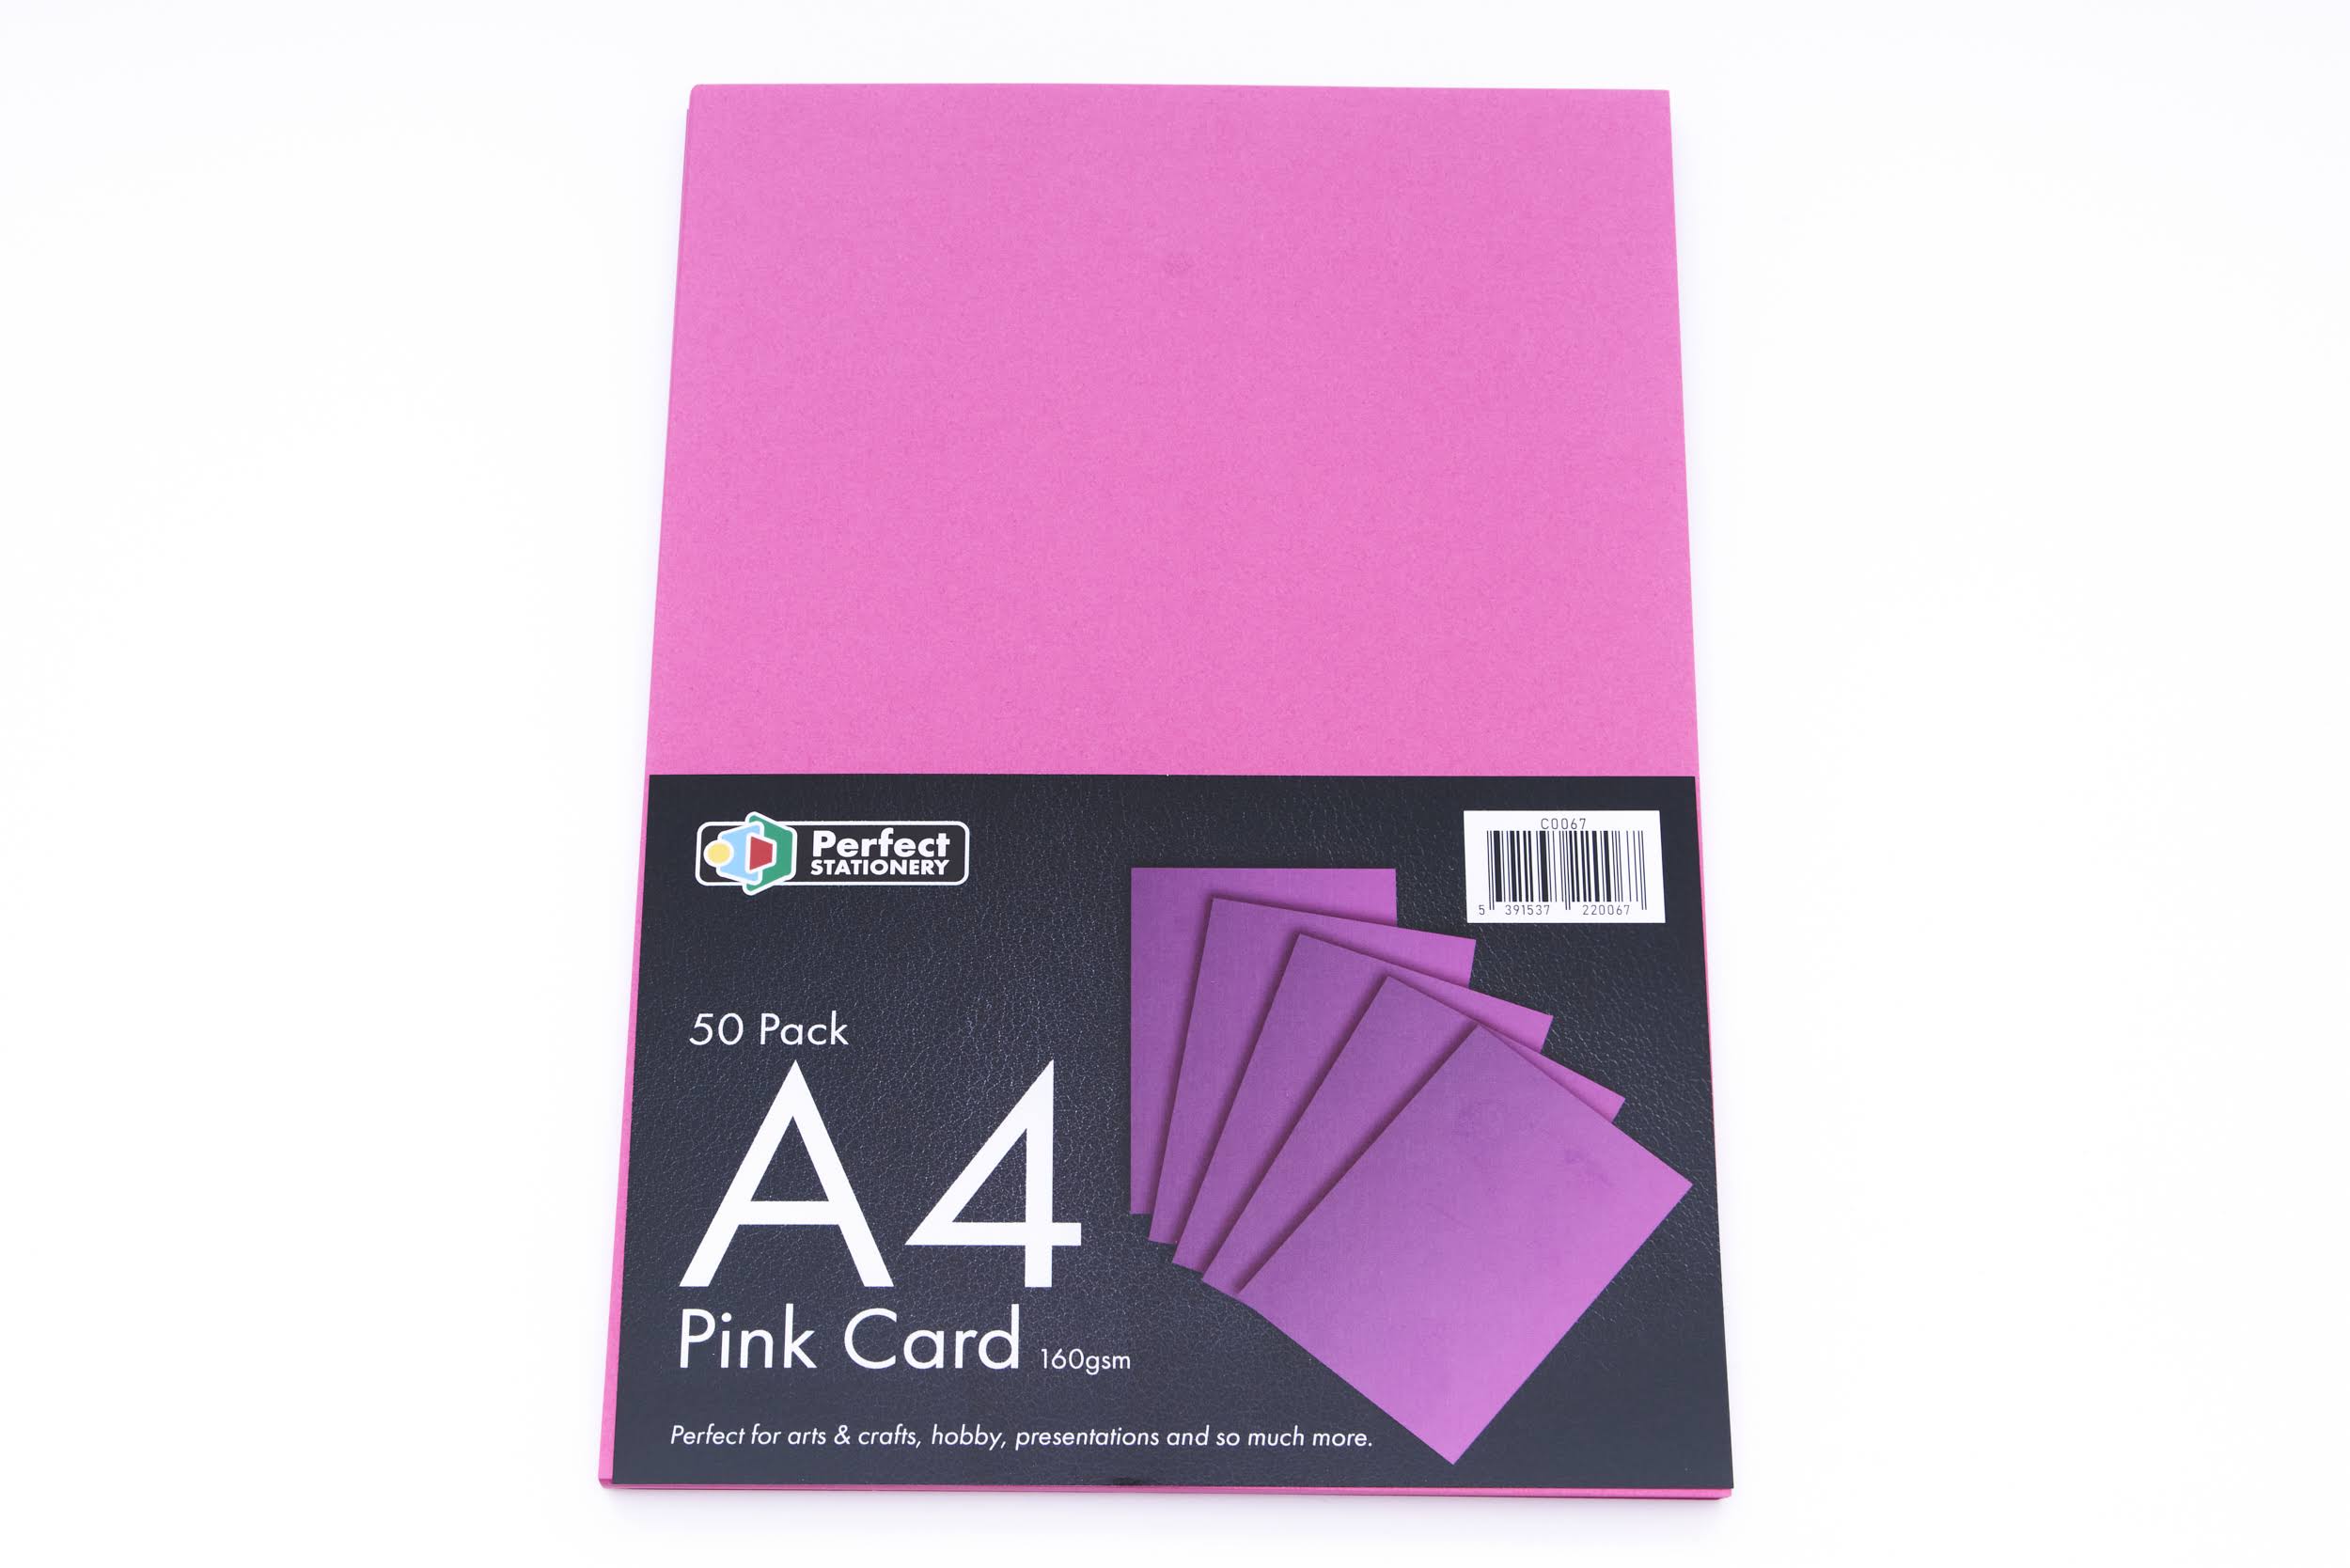 A4 Card Pink 160Gsm 50 Pack